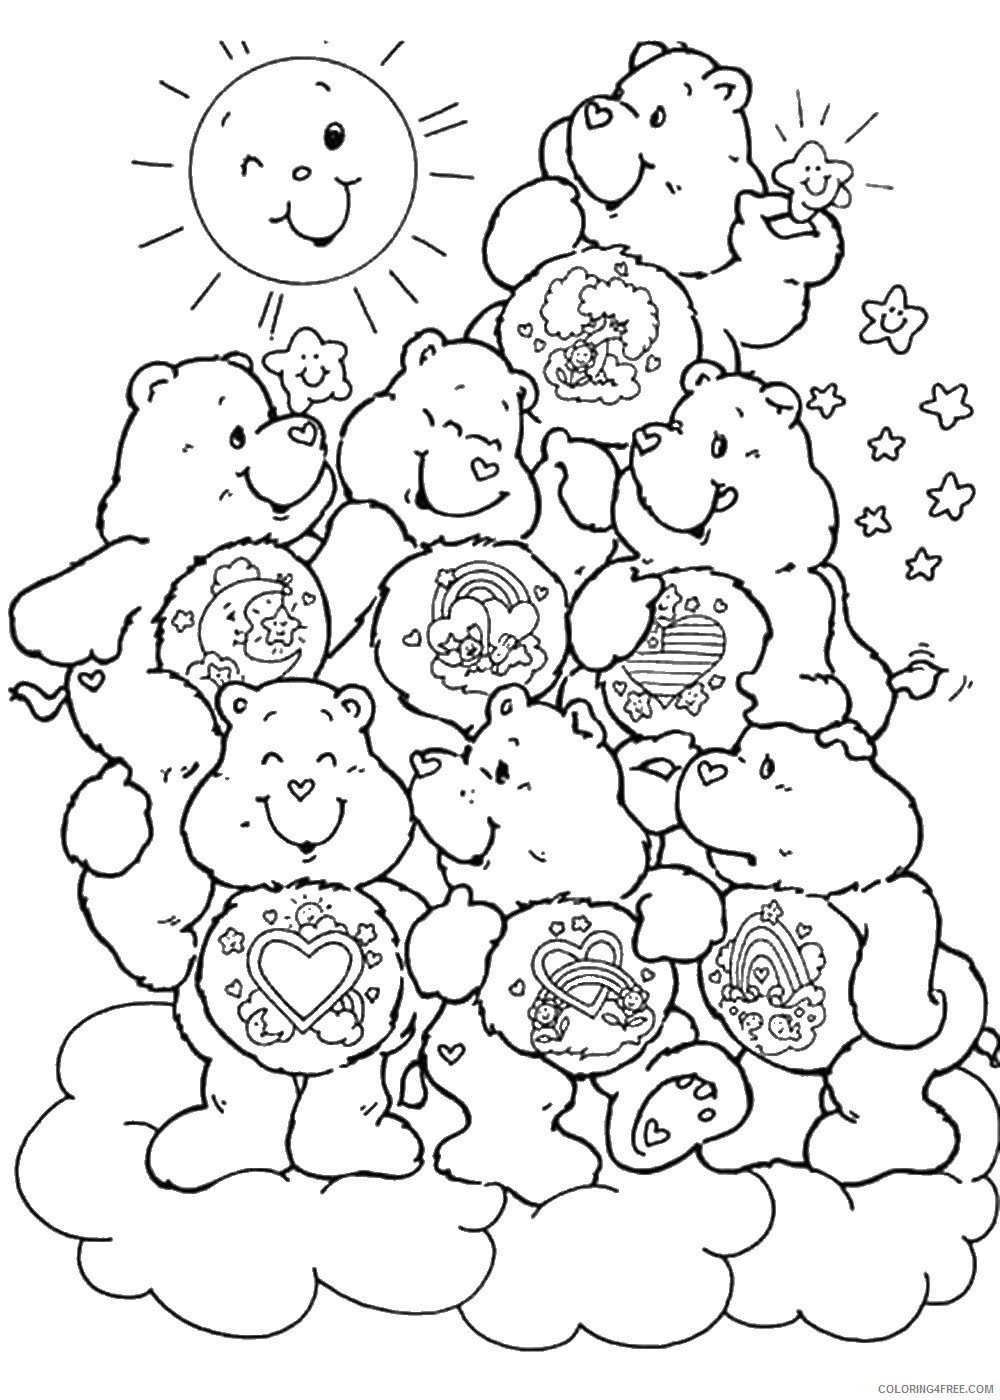 Care Bears Coloring Pages Cartoons care_bears_cl_06 Printable 2020 1546 Coloring4free